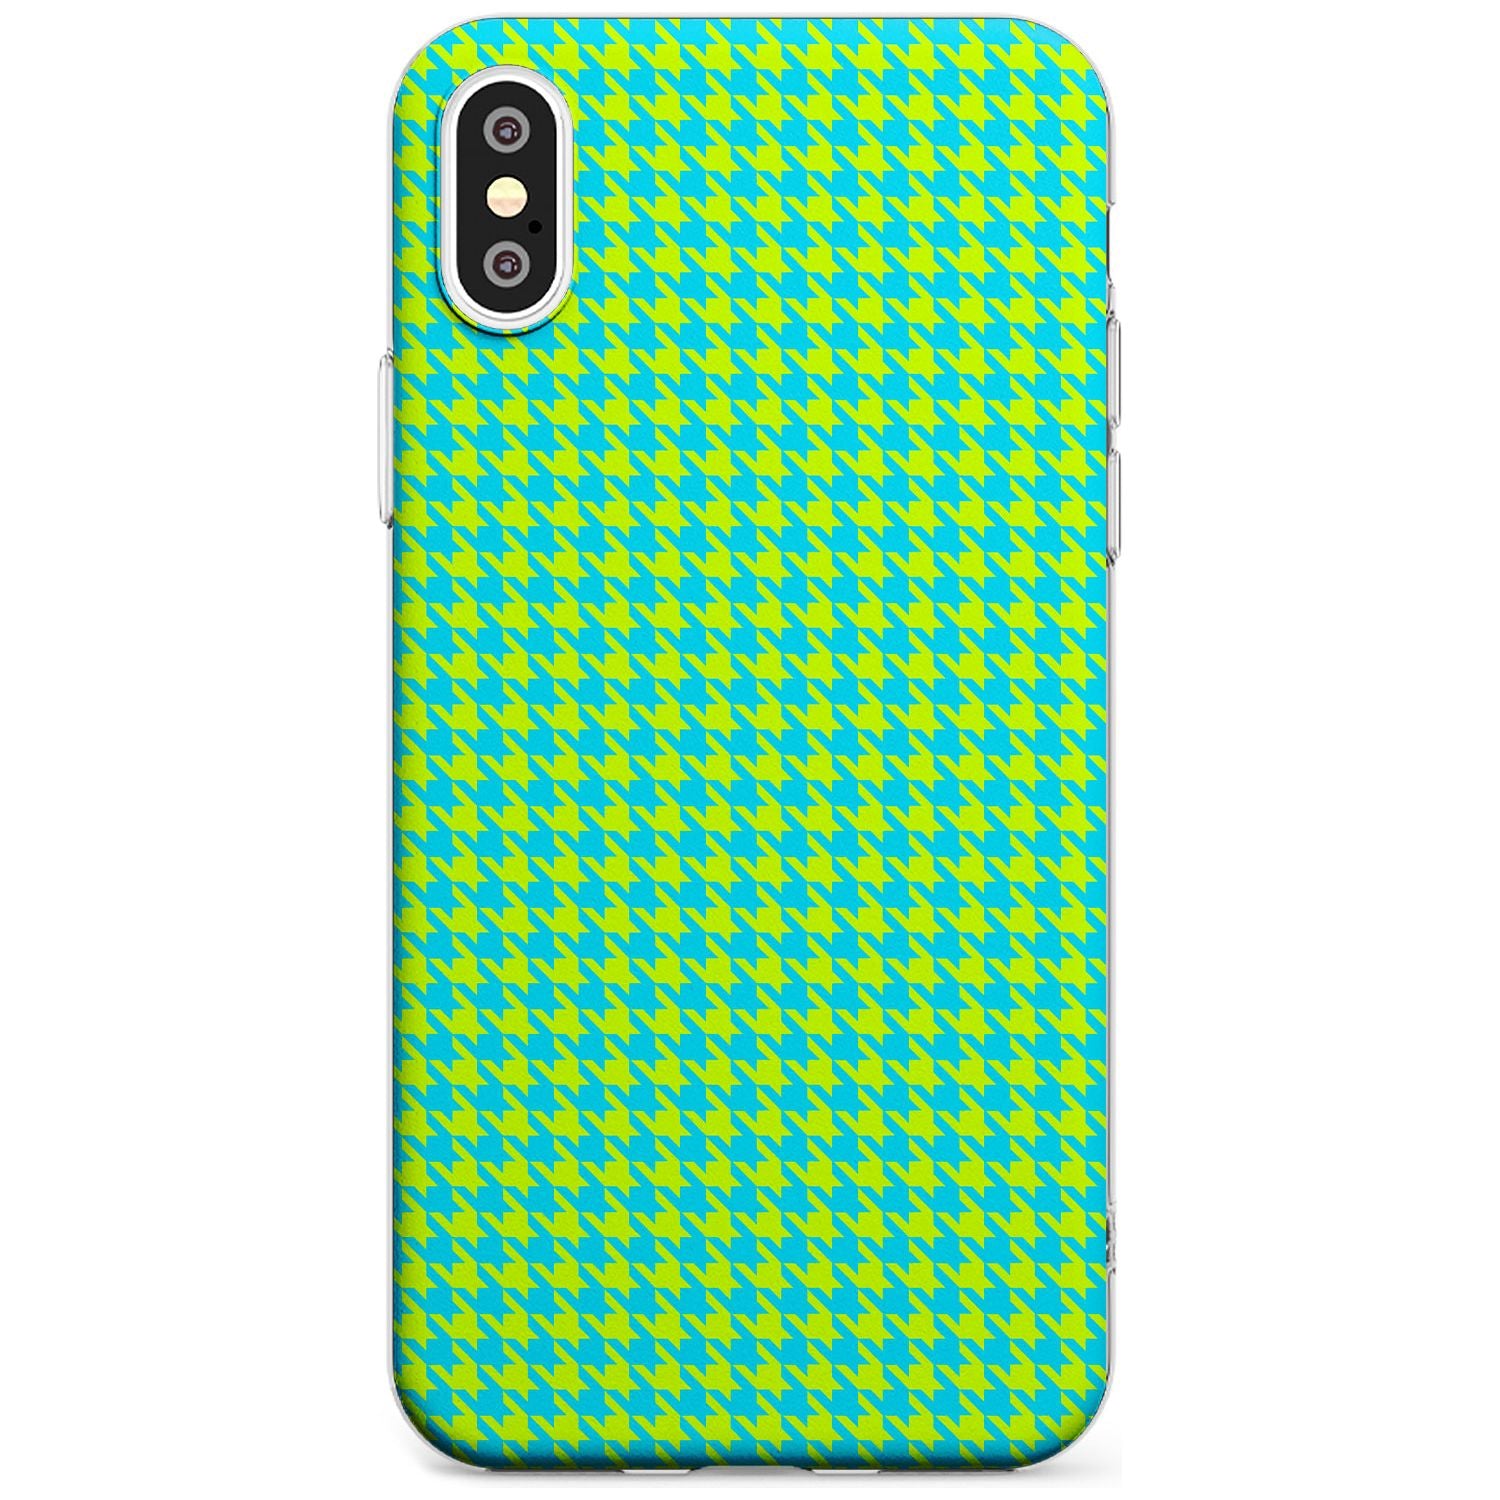 Neon Lime & Turquoise Houndstooth Pattern Slim TPU Phone Case Warehouse X XS Max XR